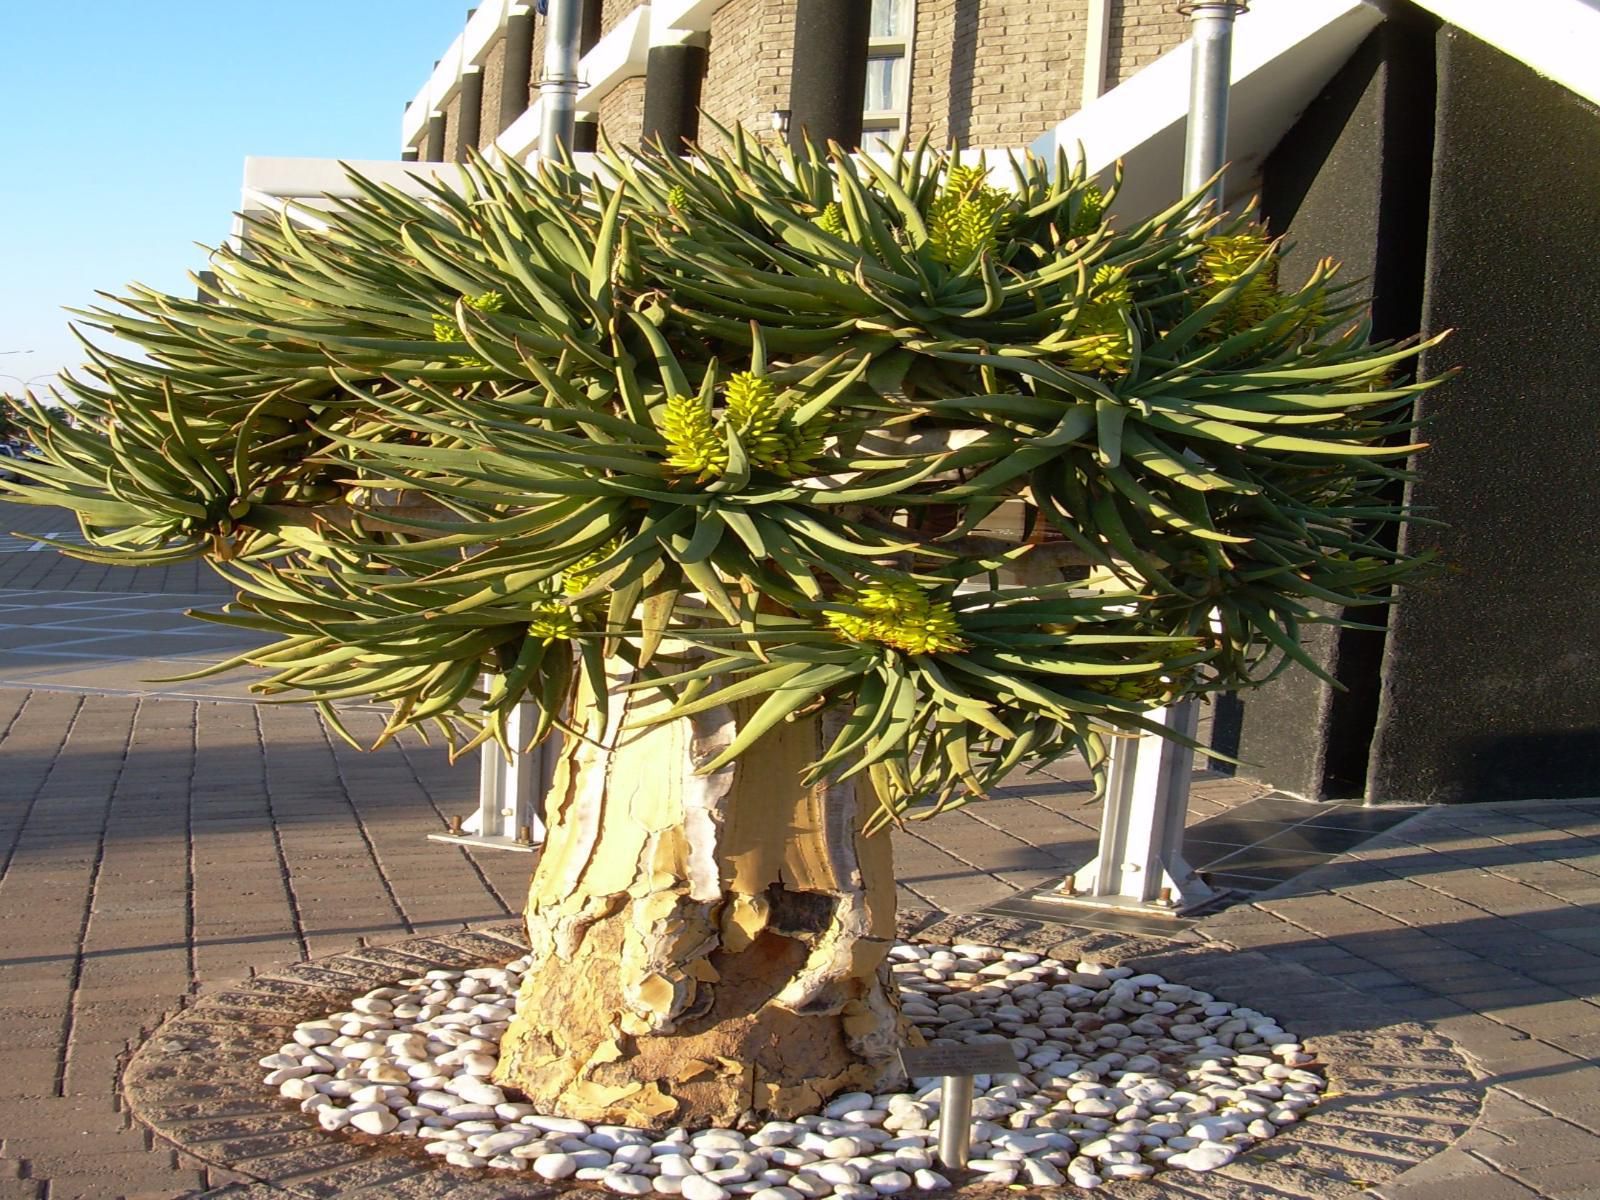 The Oasis Hotel Upington Northern Cape South Africa Plant, Nature, Tree, Wood